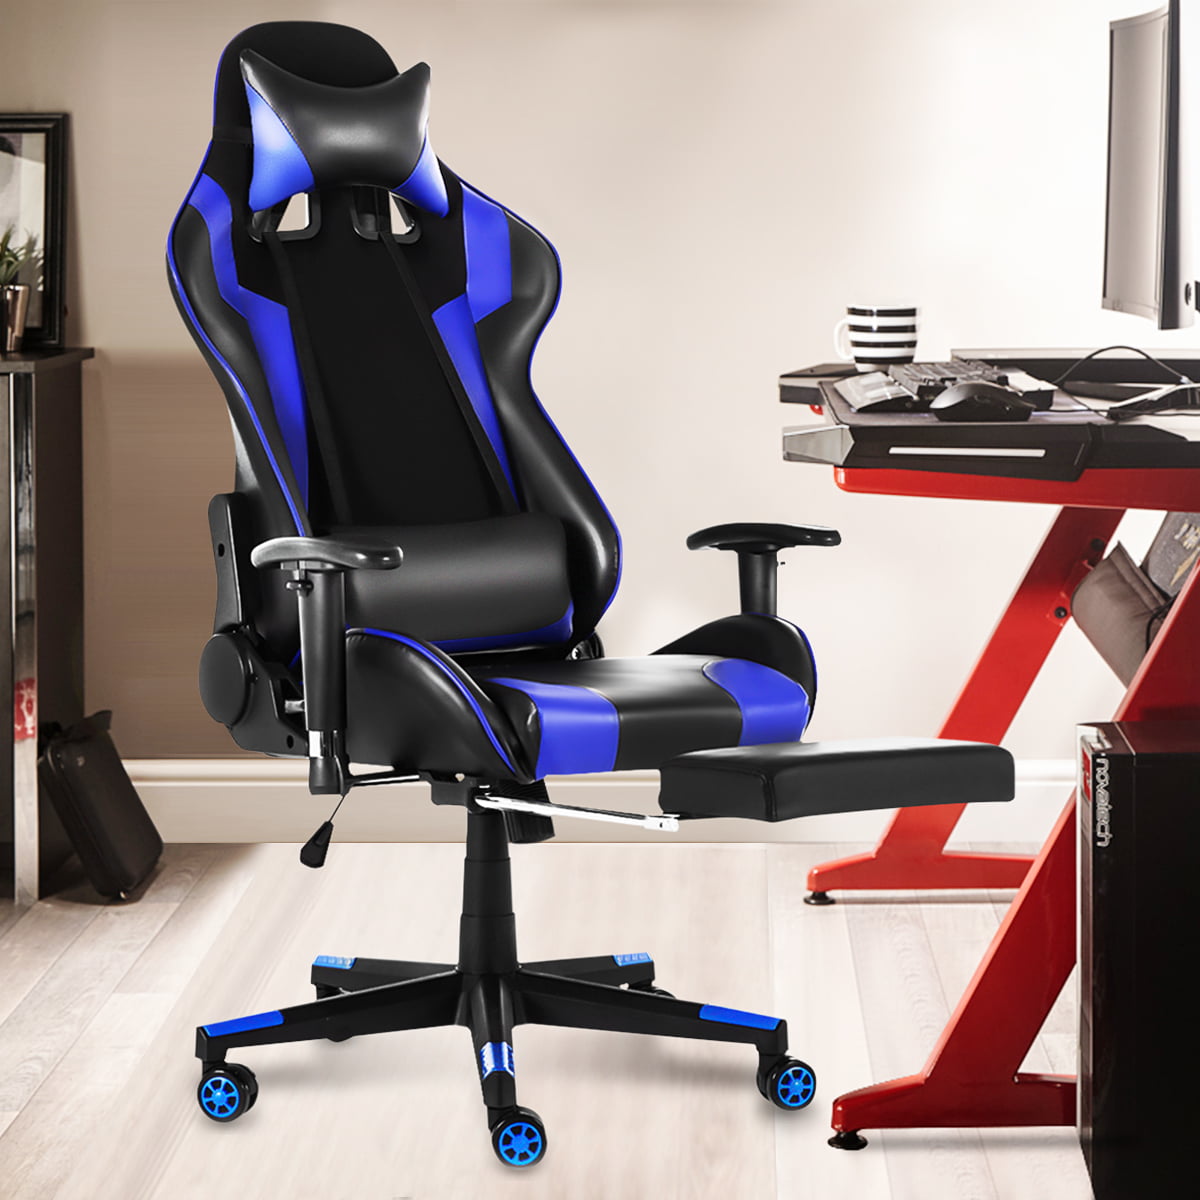 180° Adjust Leather Gaming Racing Chair Office Desk with Footrest Headrest Seat 